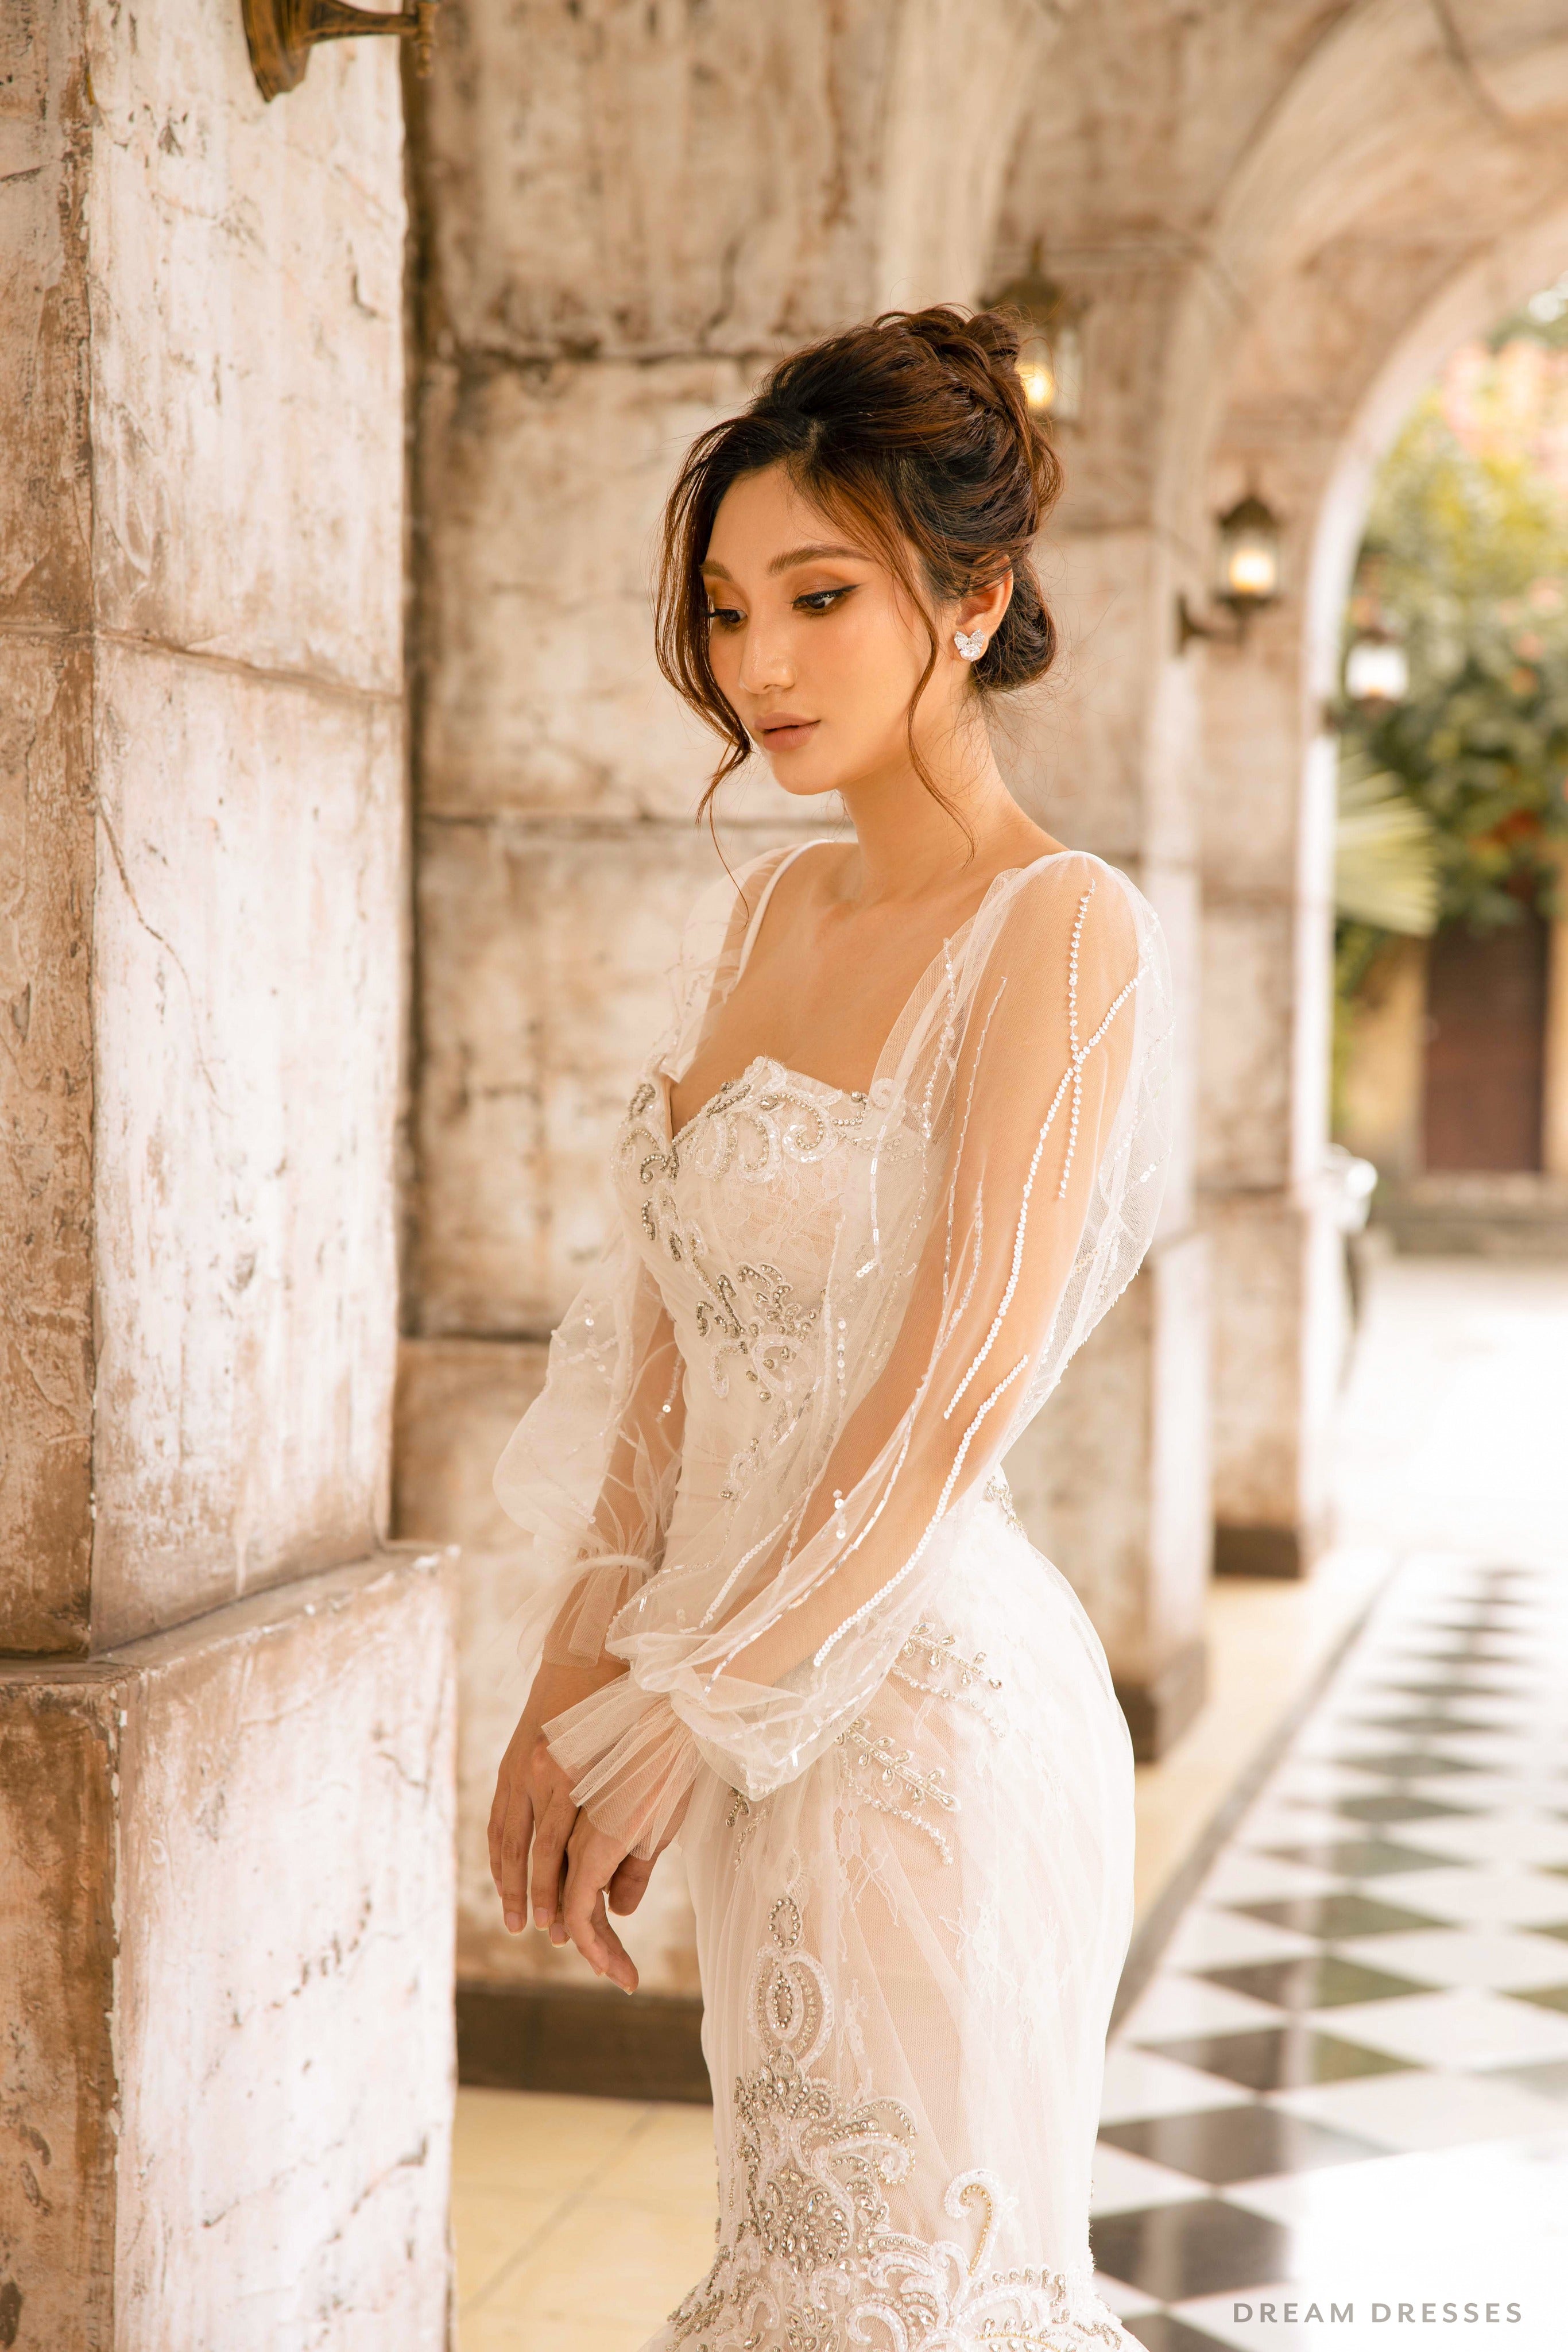 Removable Bridal Long Sleeves with Embellishments (#MARTHA)